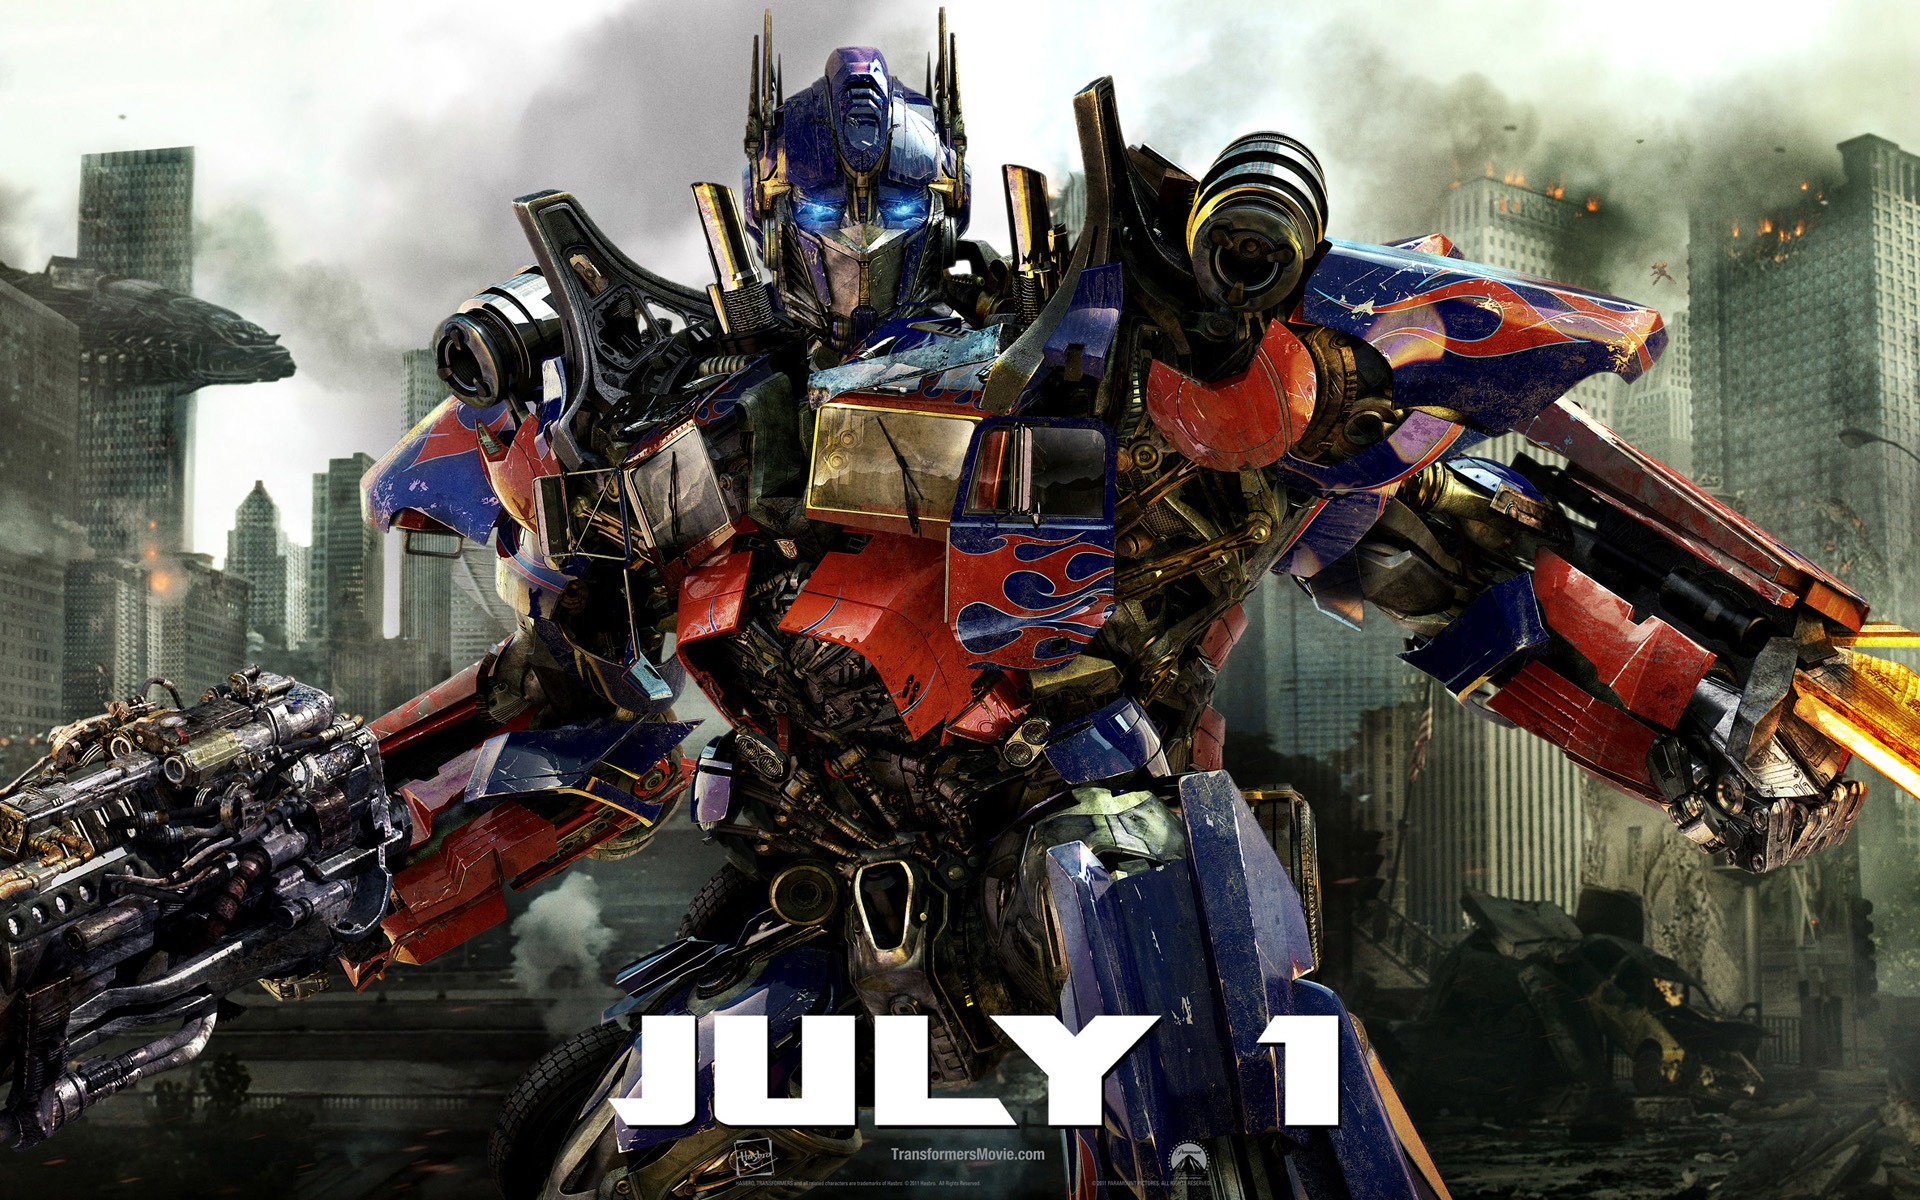 Transformers: The Dark Of The Moon HD wallpapers #1 - 1920x1200